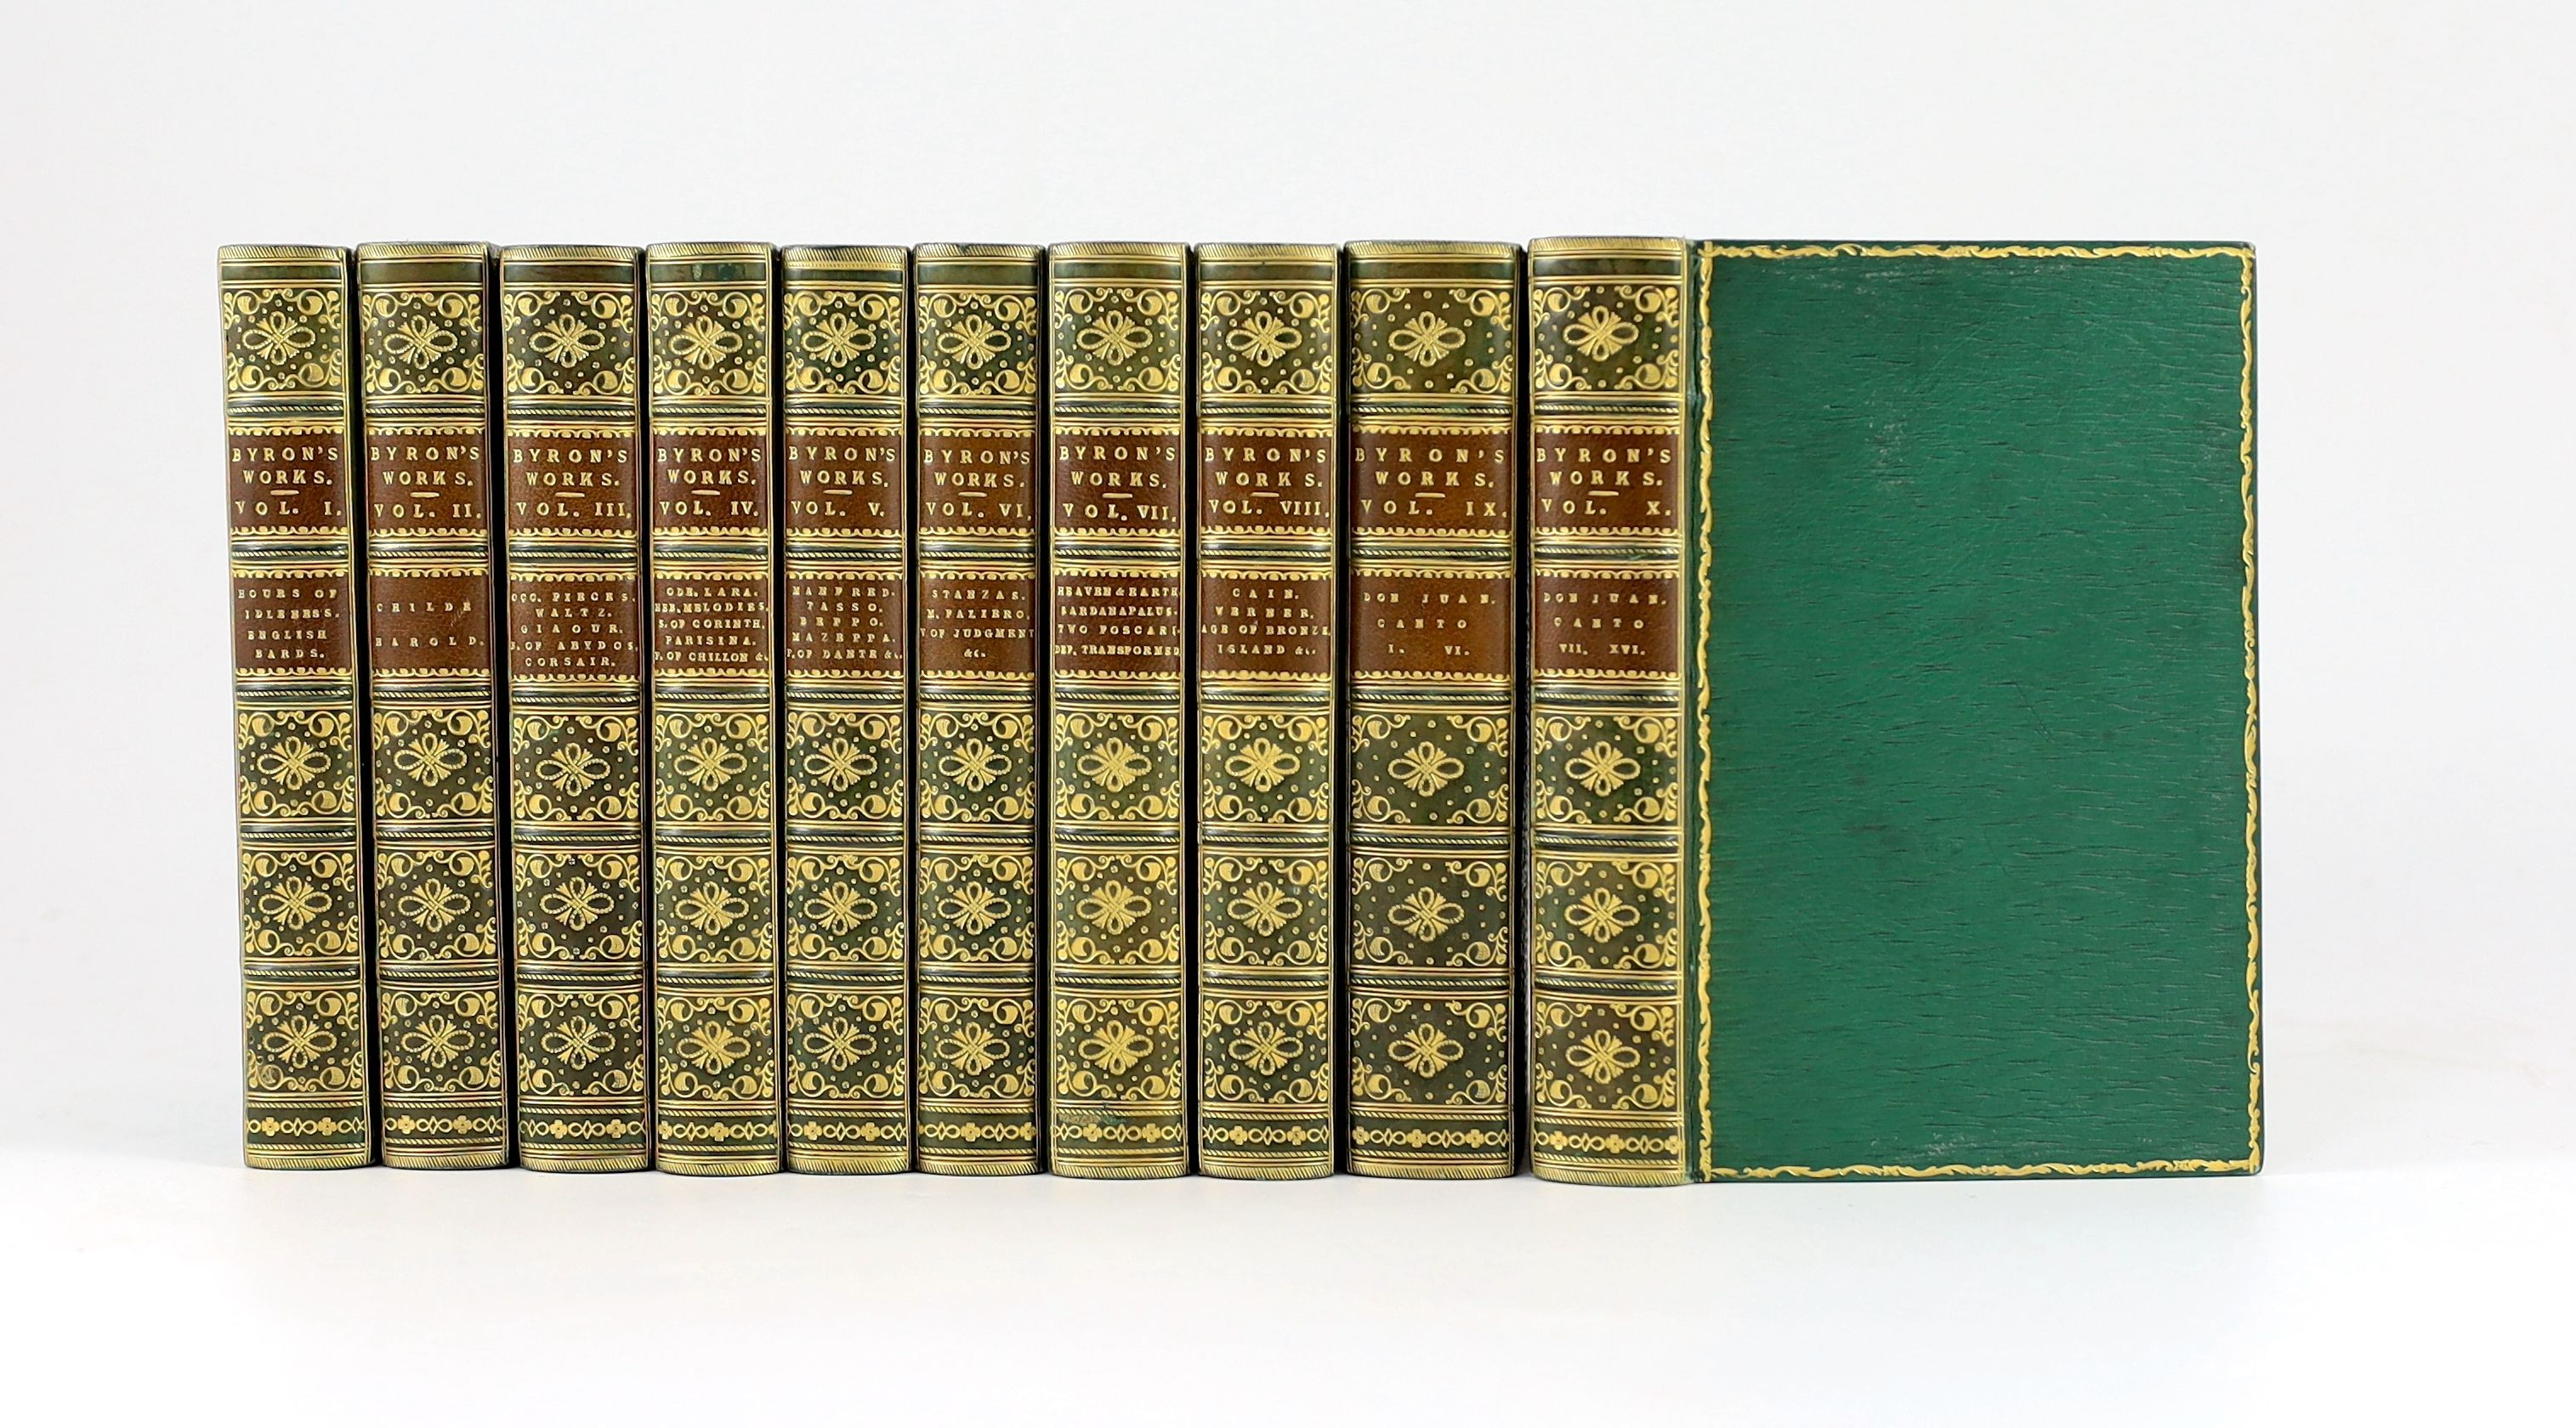 Byron, George Gordon Noel, Lord - The Poetical Works, 10 vols, 8vo, green grained morocco gilt by Riviere, with engraved frontises and additional pictorial title pages, John Murray, London, 1854